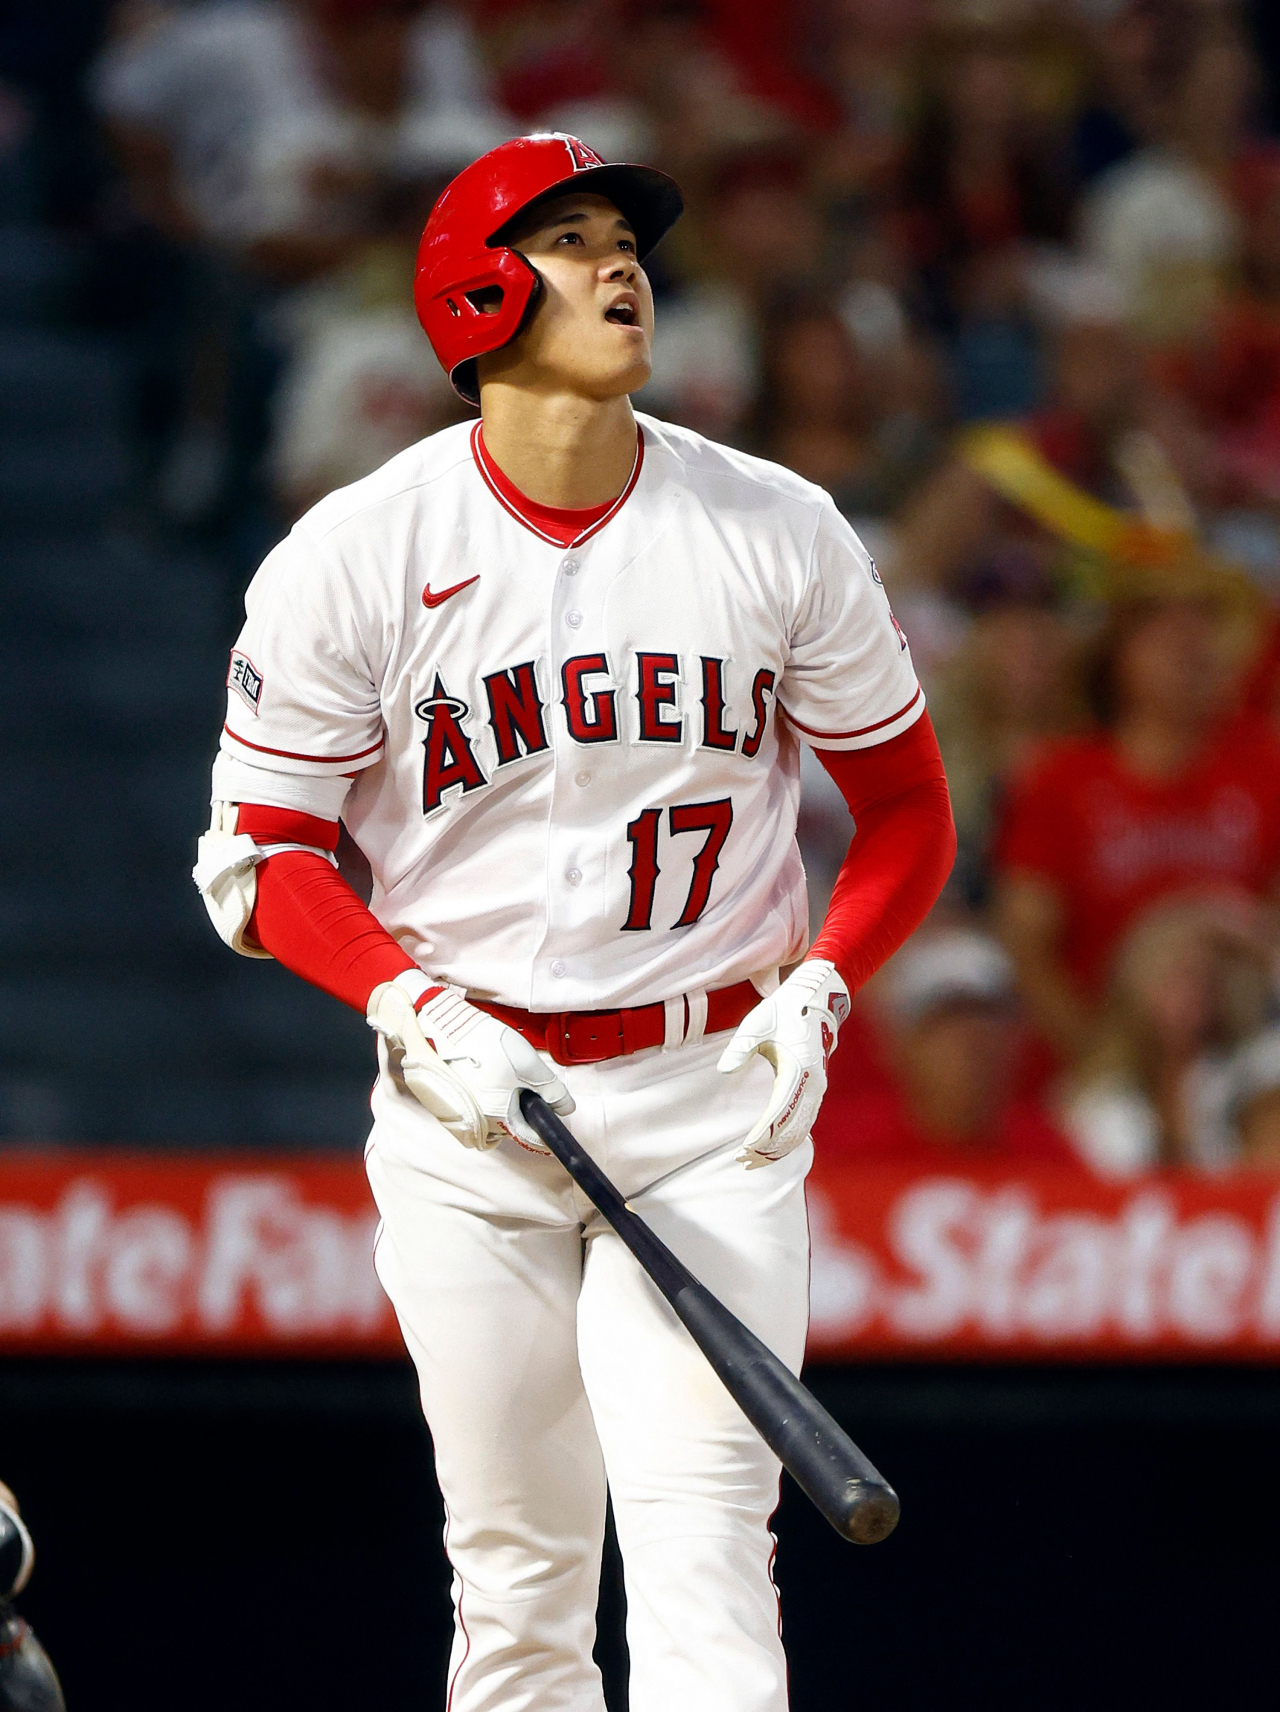 Shohei Ohtani rivals Babe Ruth as an all time great, says MLB historian